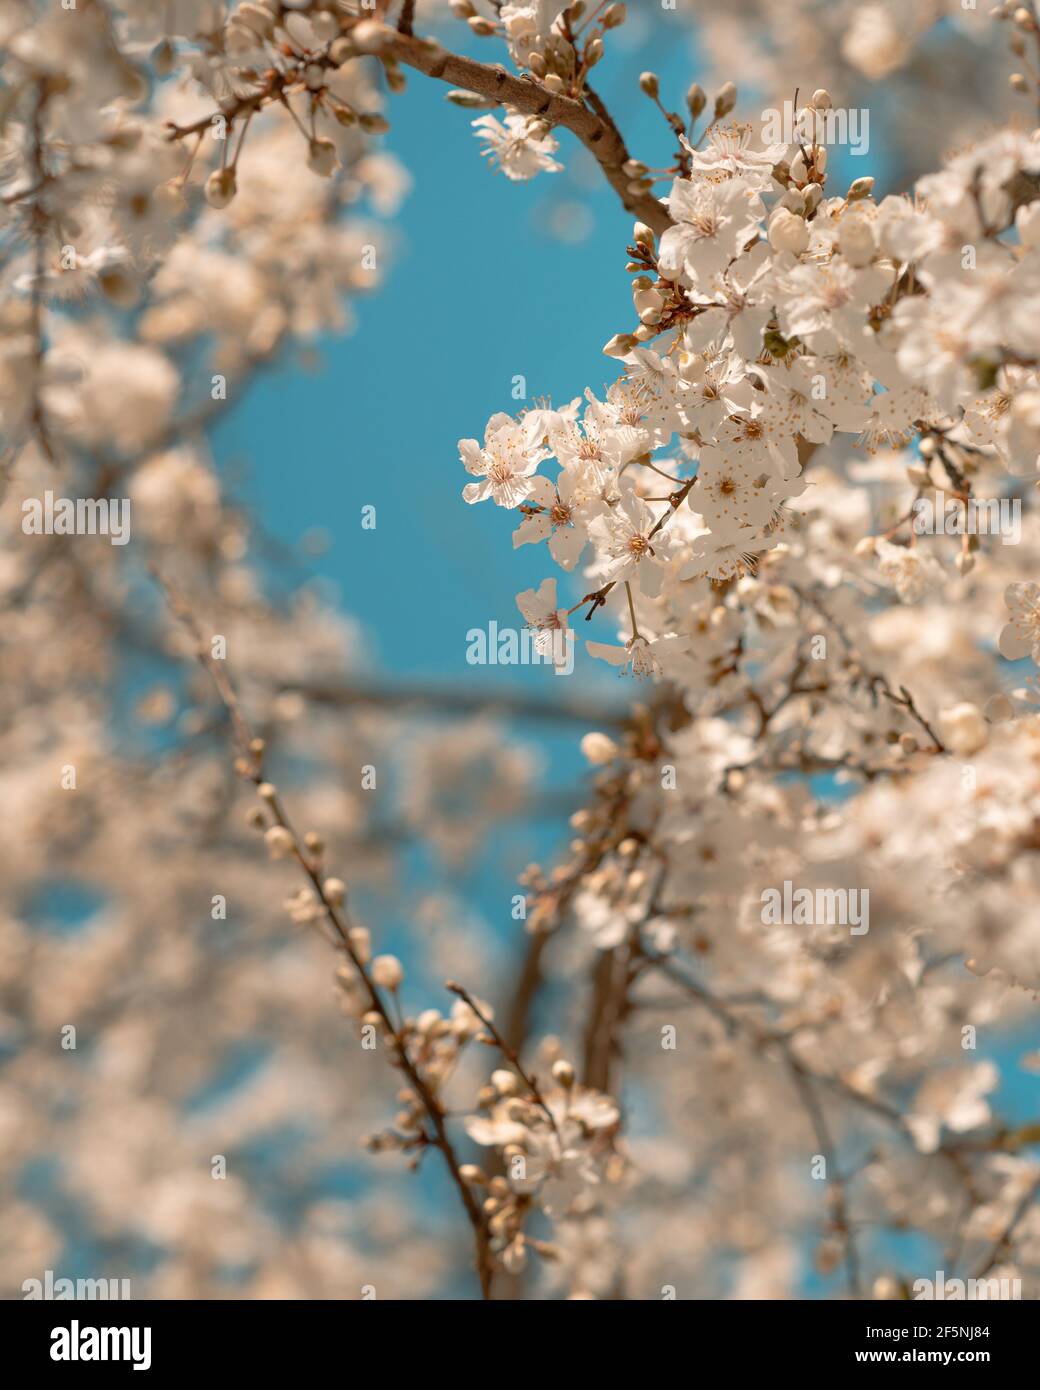 Beautiful tree bloom detail with white flowers in British garden, springtime Stock Photo